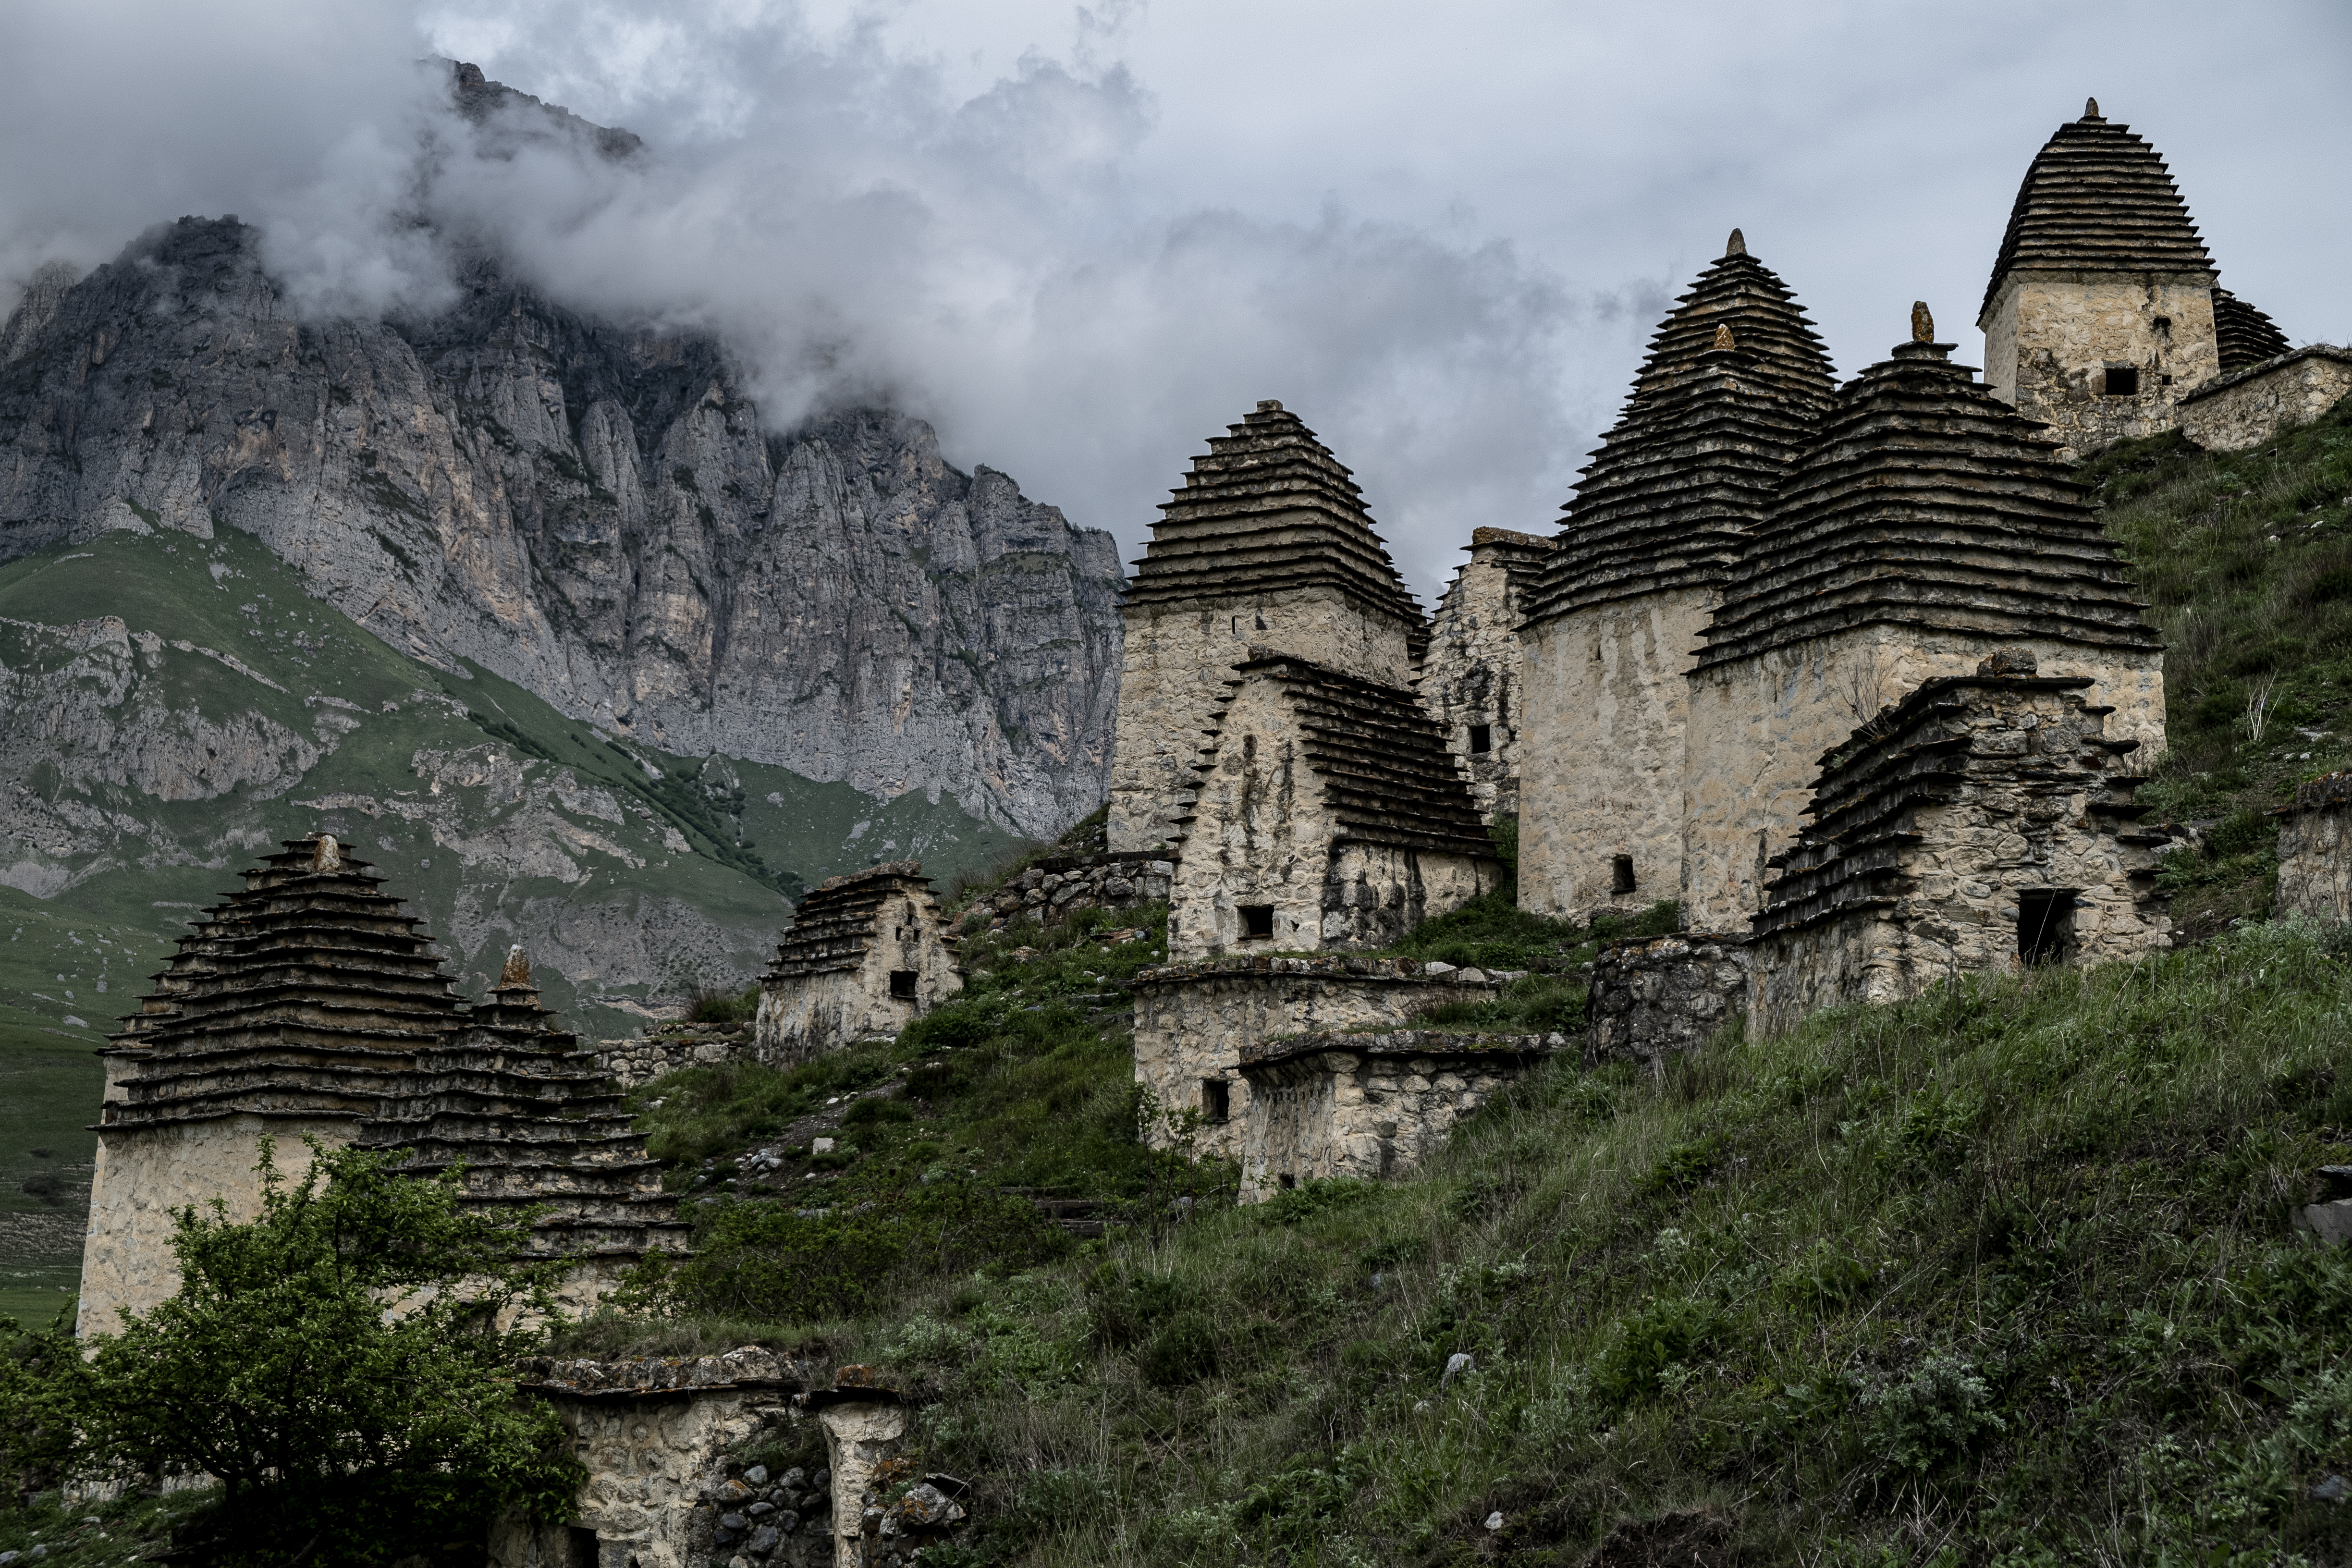 Burial vaults in the City of Dead: Dargavs, North Ossetia, Russia by Vladimir Pankratov